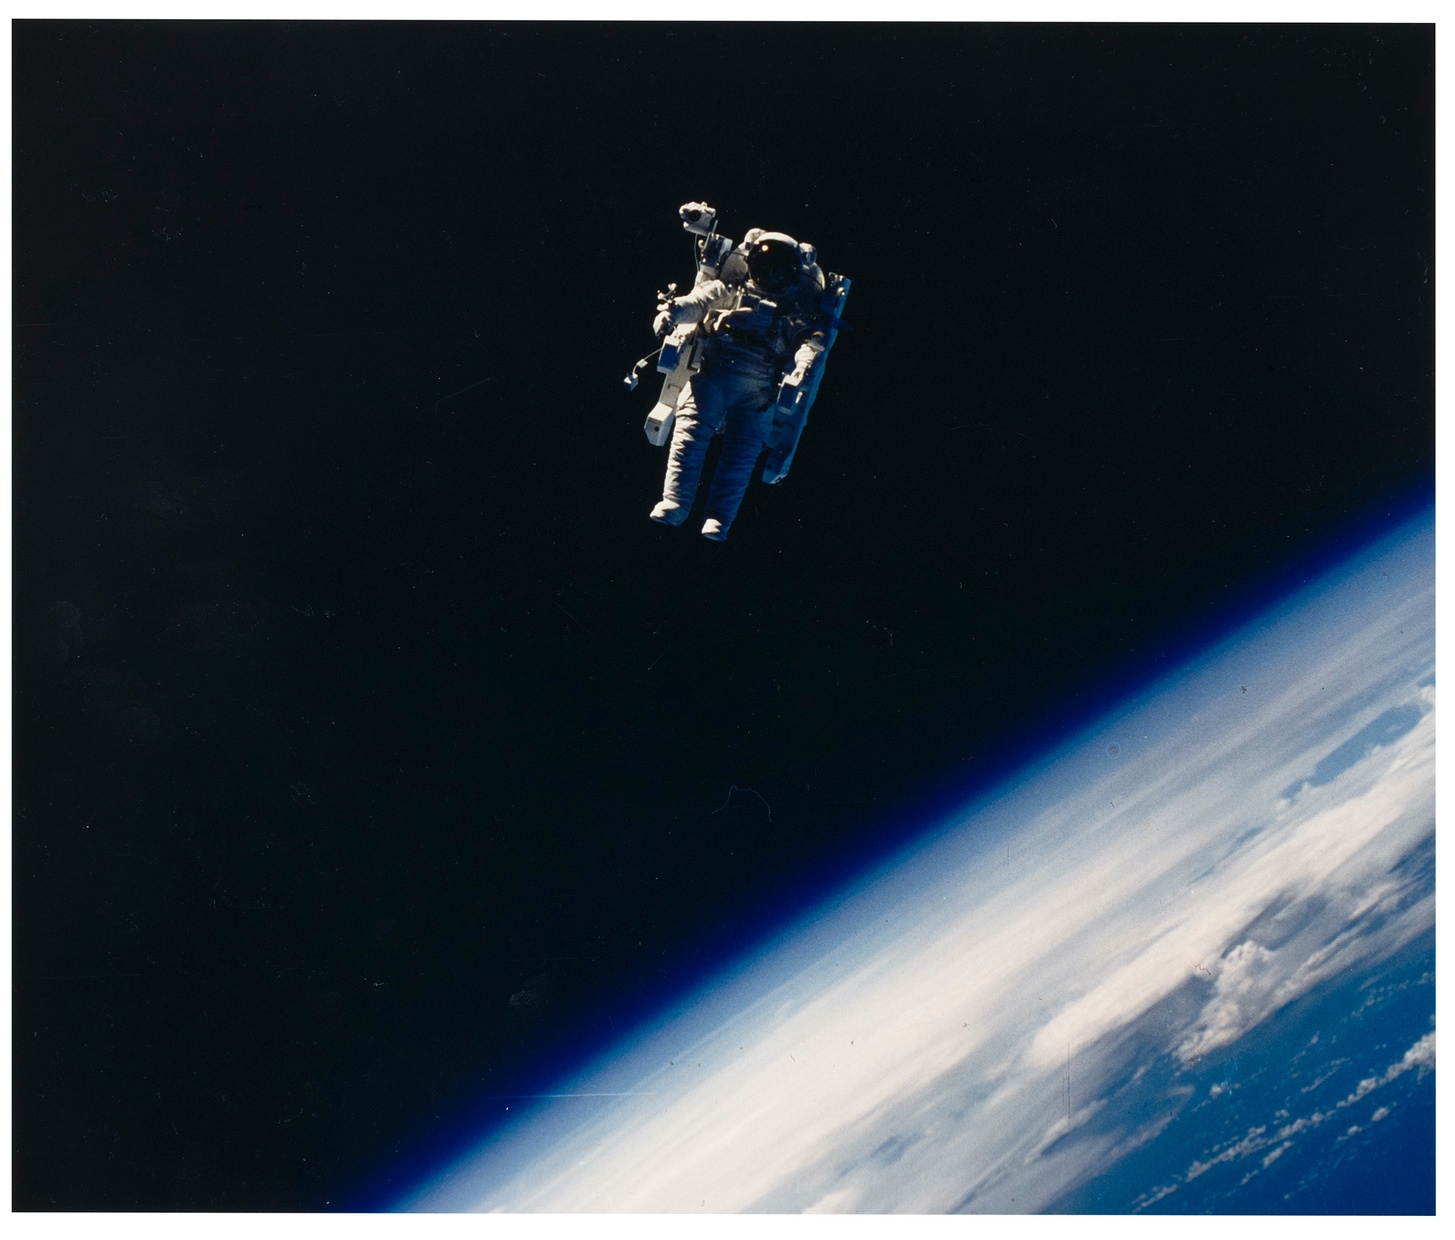 An astronaut, wearing a spacesuit and large backpack, floats untethered in space with Earth’s atmosphere below.